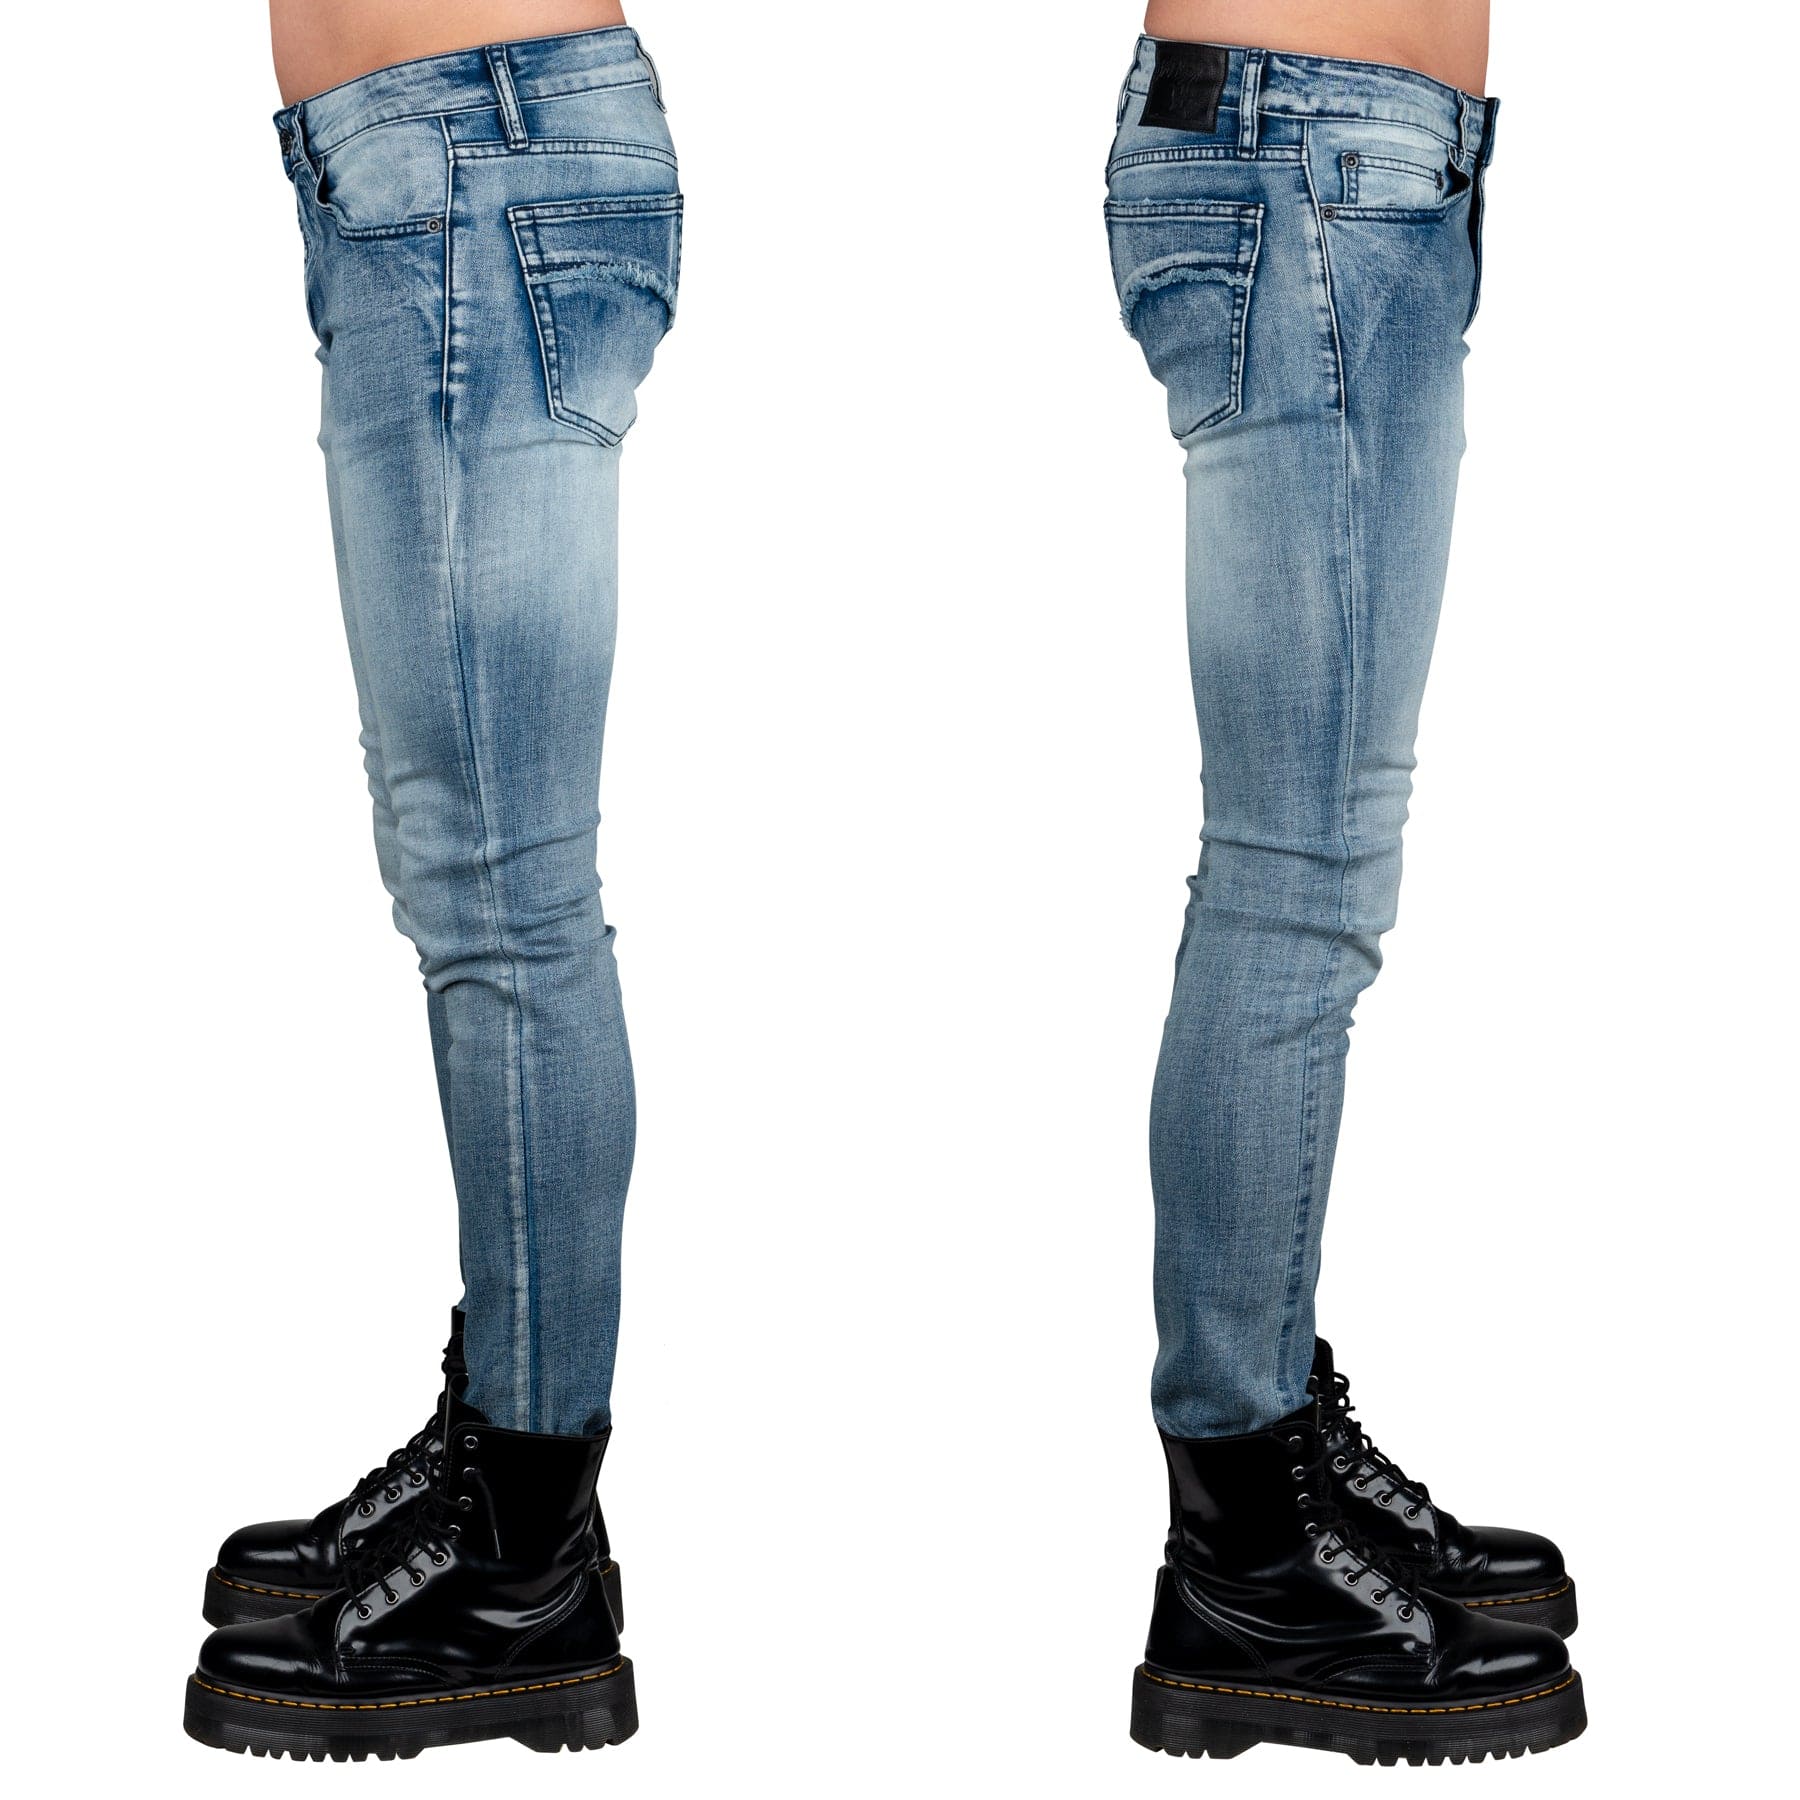 Wornstar Clothing Mens Jeans. Rampager Denim Jeans - Classic Blue